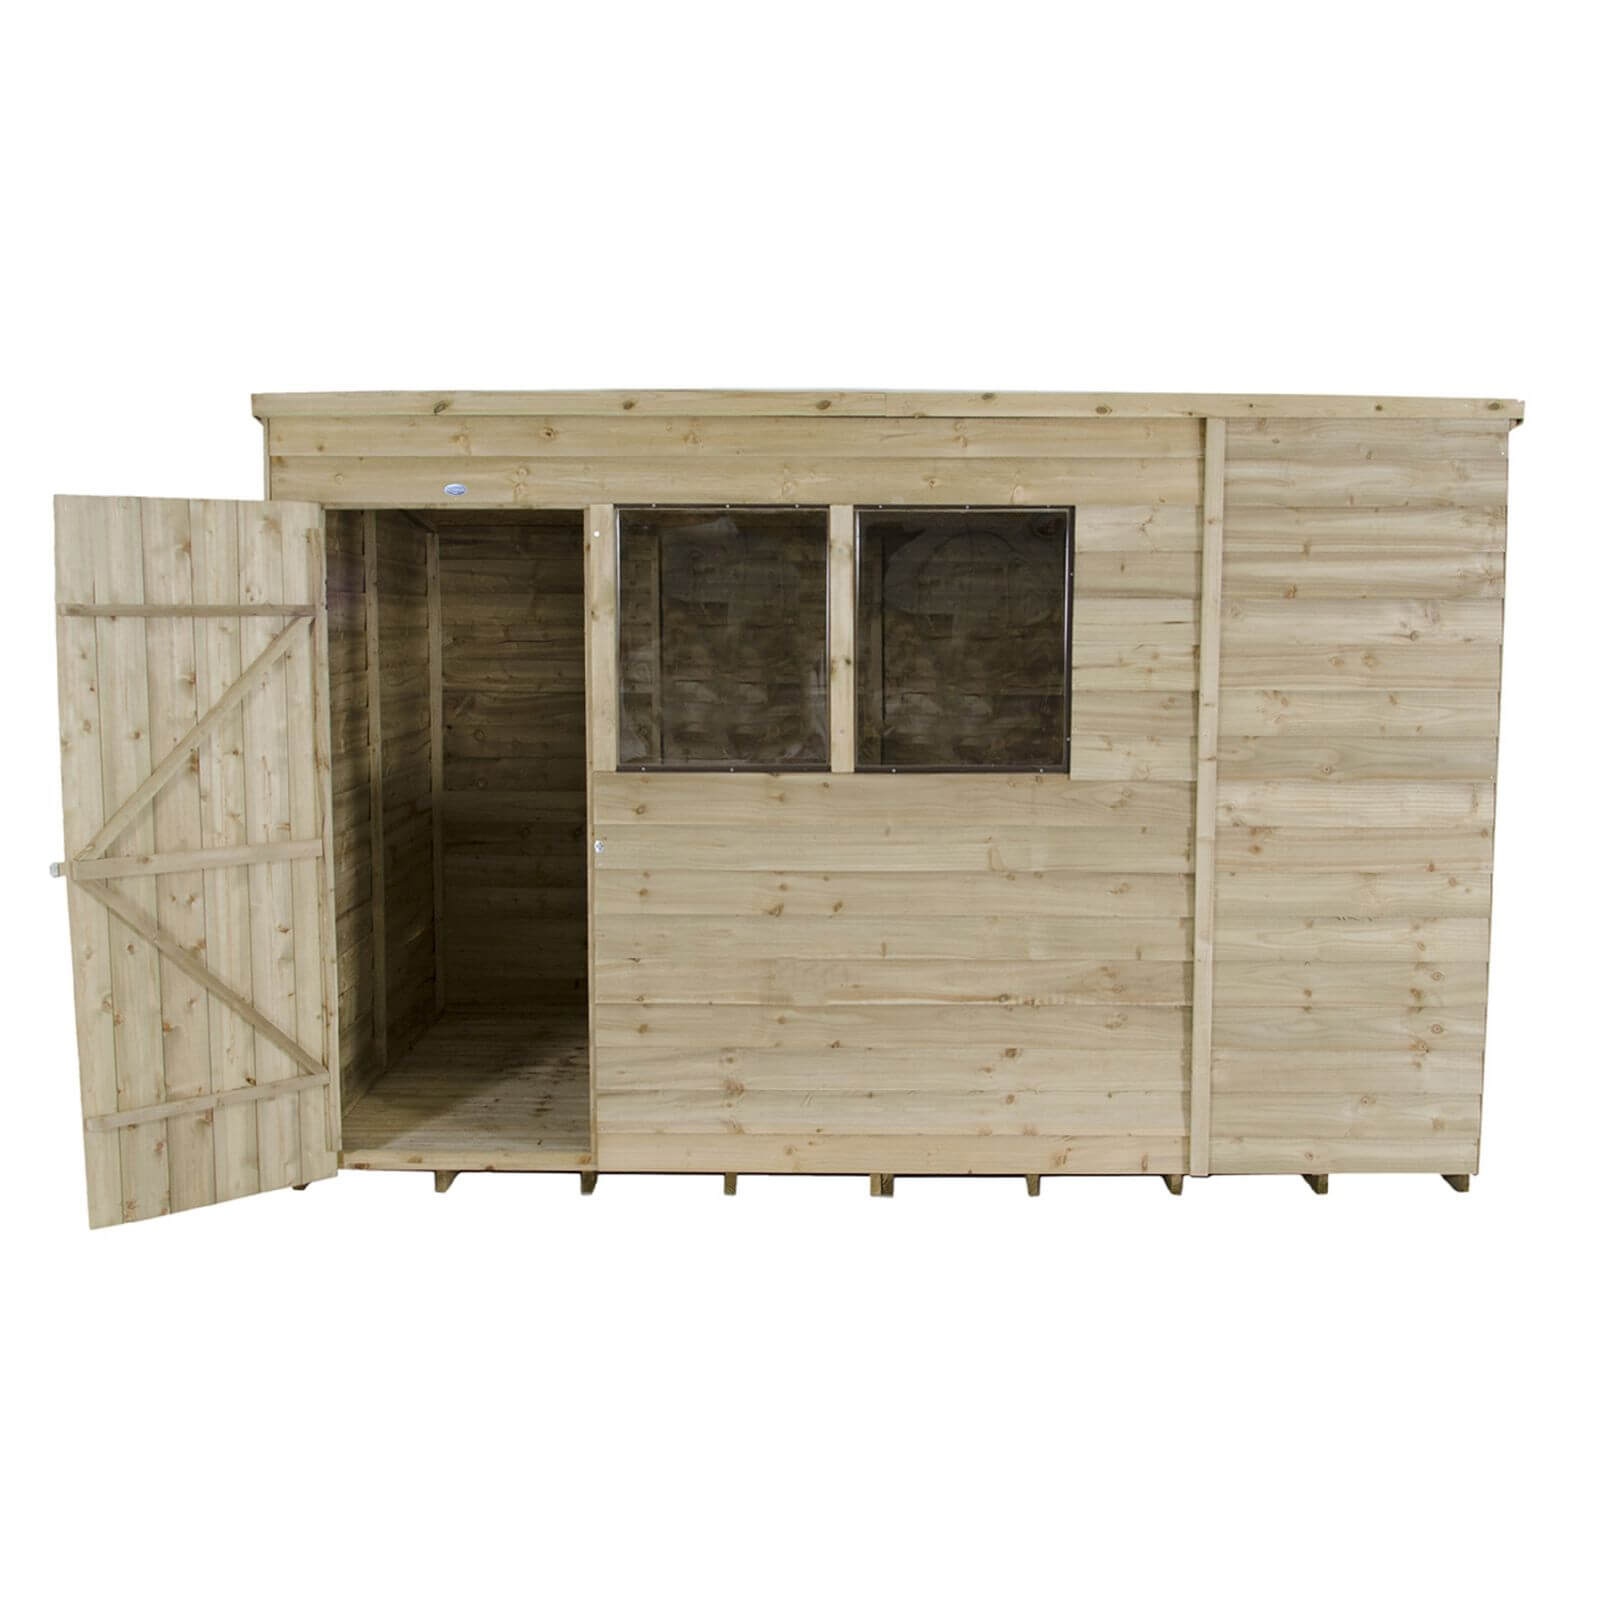 10x6ft Forest Natural Timber Overlap Pent Pressure Treated Wooden Shed